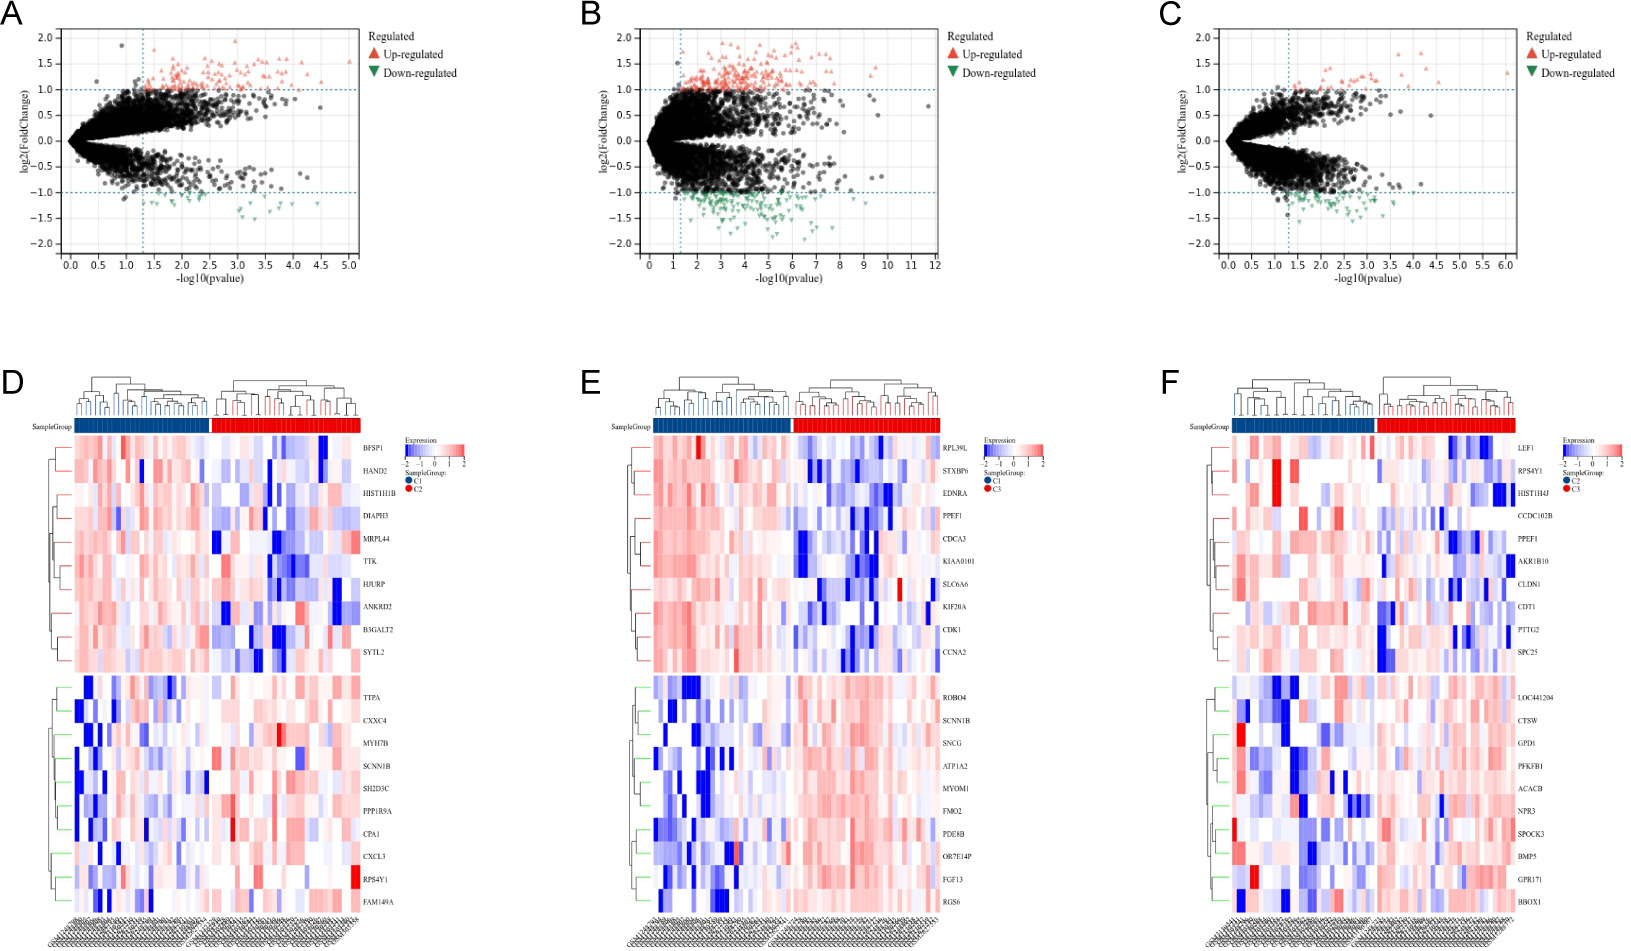 Fig. 4 
            Identification of differentially expressed genes (DEGs). a) Volcano map showing DEGs of C1 subtype vs C2 subtype. b) DEGs of C1 vs C3. c) DEGs of C2 vs C3. d) Heatmap shows the top ten up-regulated and down-regulated C1 vs C2 DEGs. e) Top ten up-regulated and down-regulated C1 vs C3 DEGs. f) Top ten up-regulated and down-regulated C2 vs C3 DEGs.
          